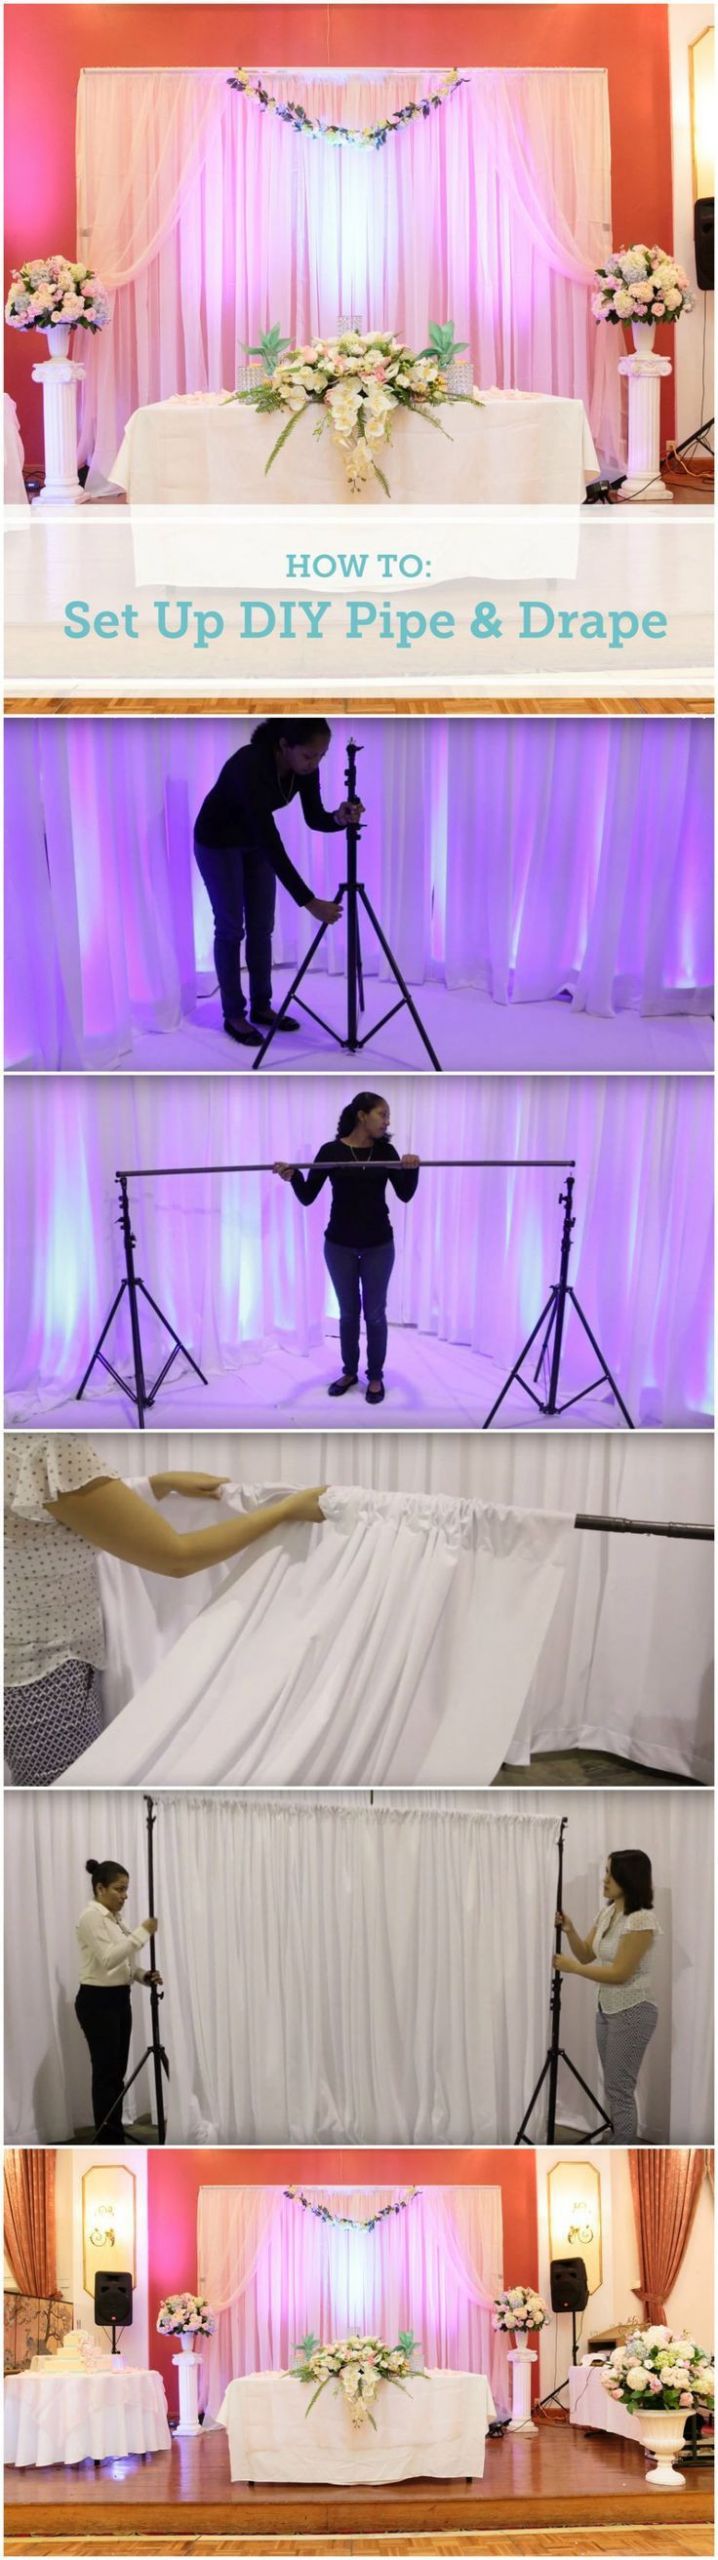 DIY Pipe And Drape For Wedding
 Pin on draping